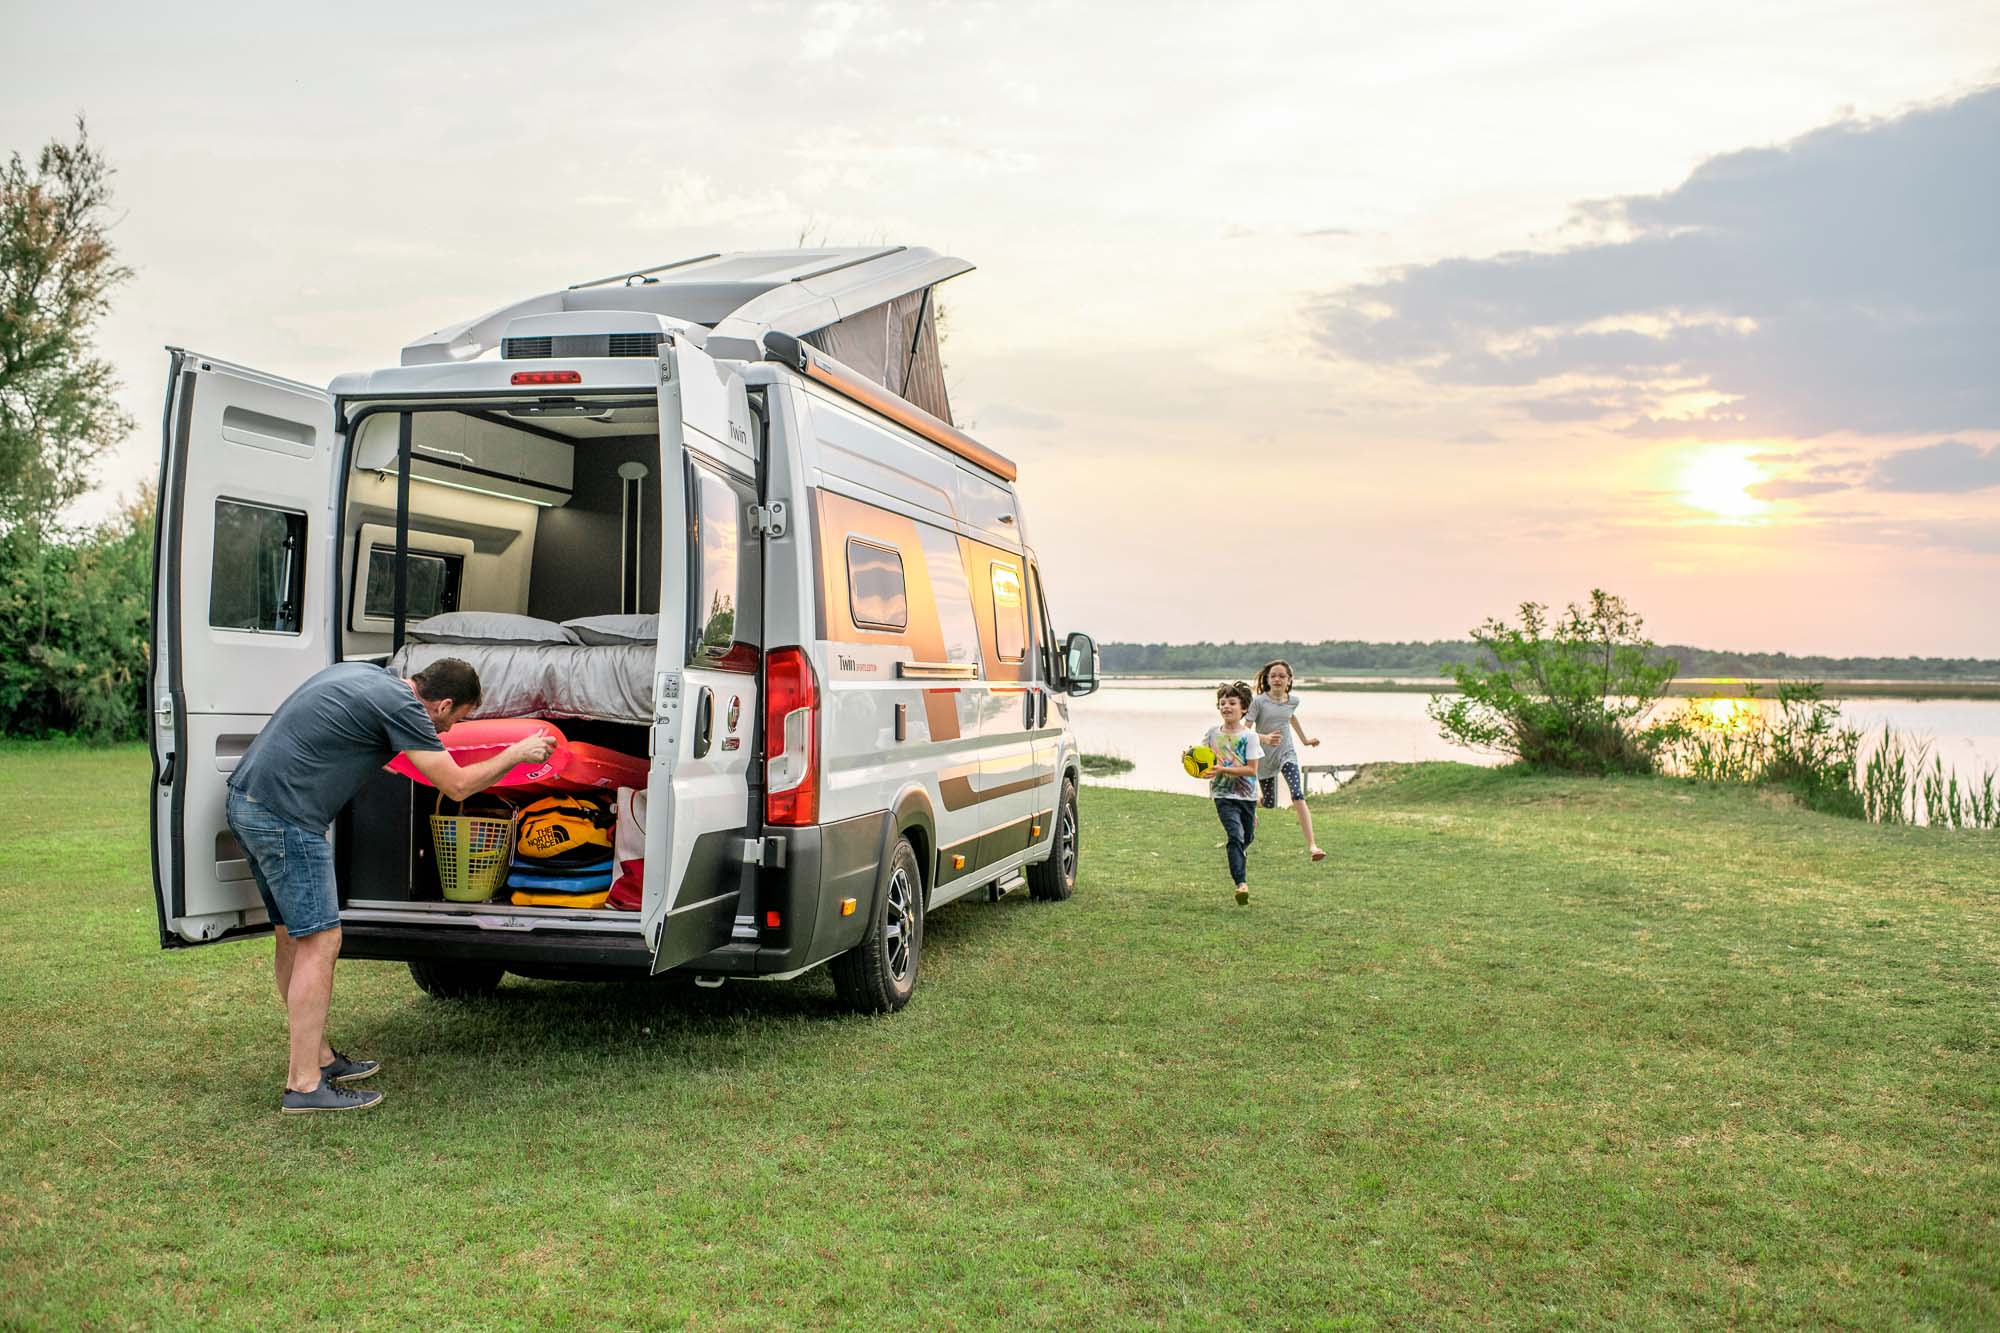 A Man Looks In The Boot Of His Van Conversion Motorhome While Two Children Run Playing Games, With A Lake And Sunset In The Distance